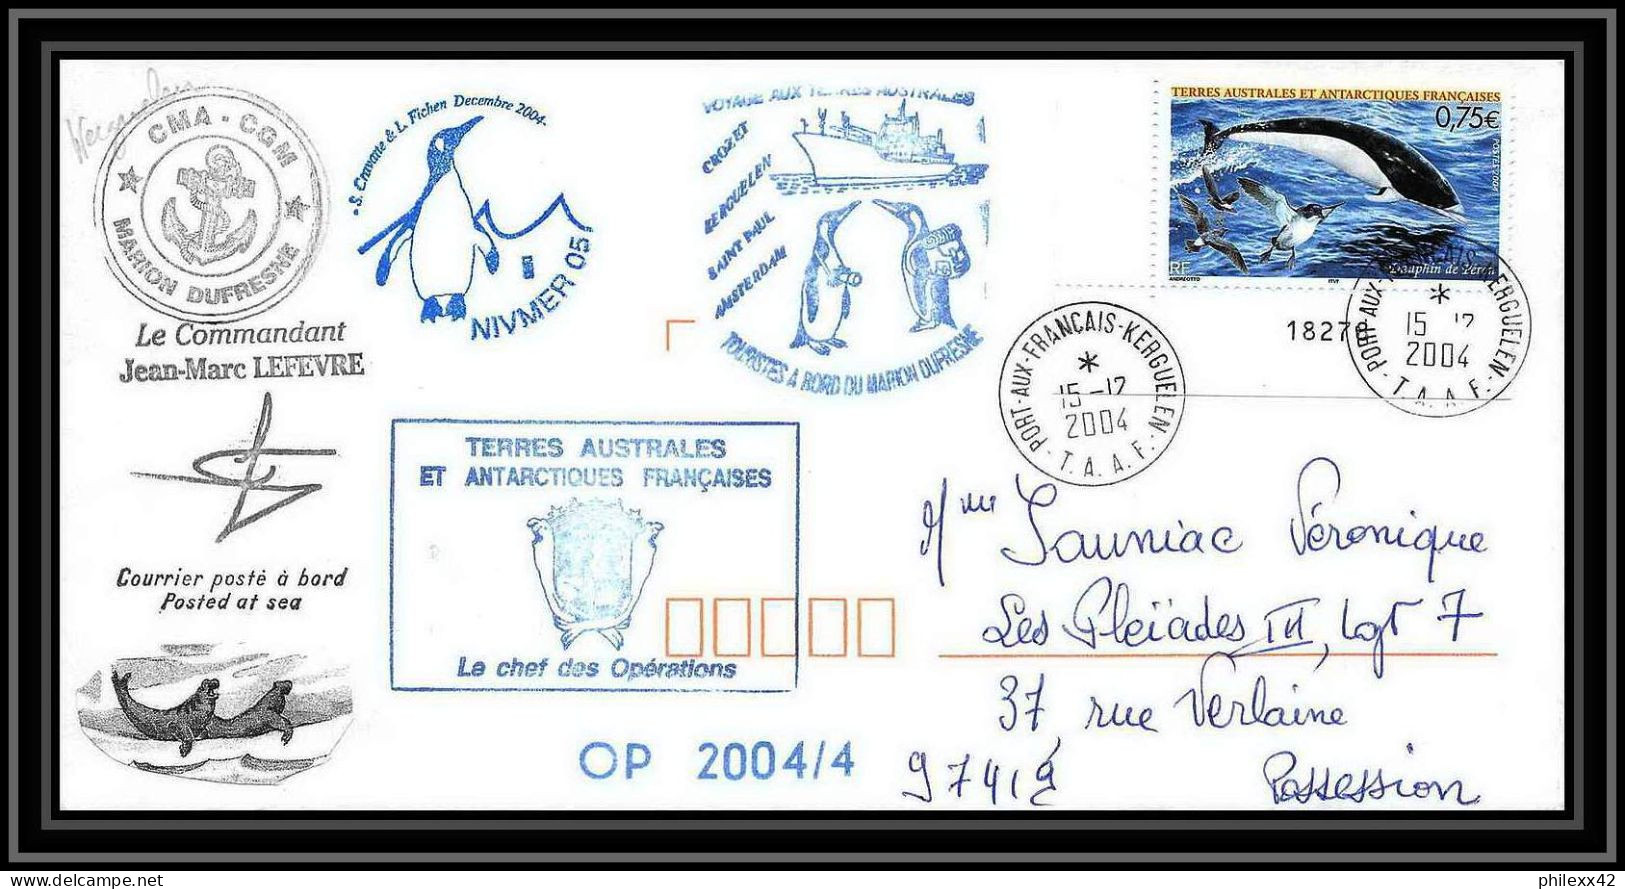 2477 ANTARCTIC Terres Australes TAAF Lettre Cover Dufresne 2 Signé Signed OP 2004/4 N°385 Possession Reunion Dauphin - Expediciones Antárticas